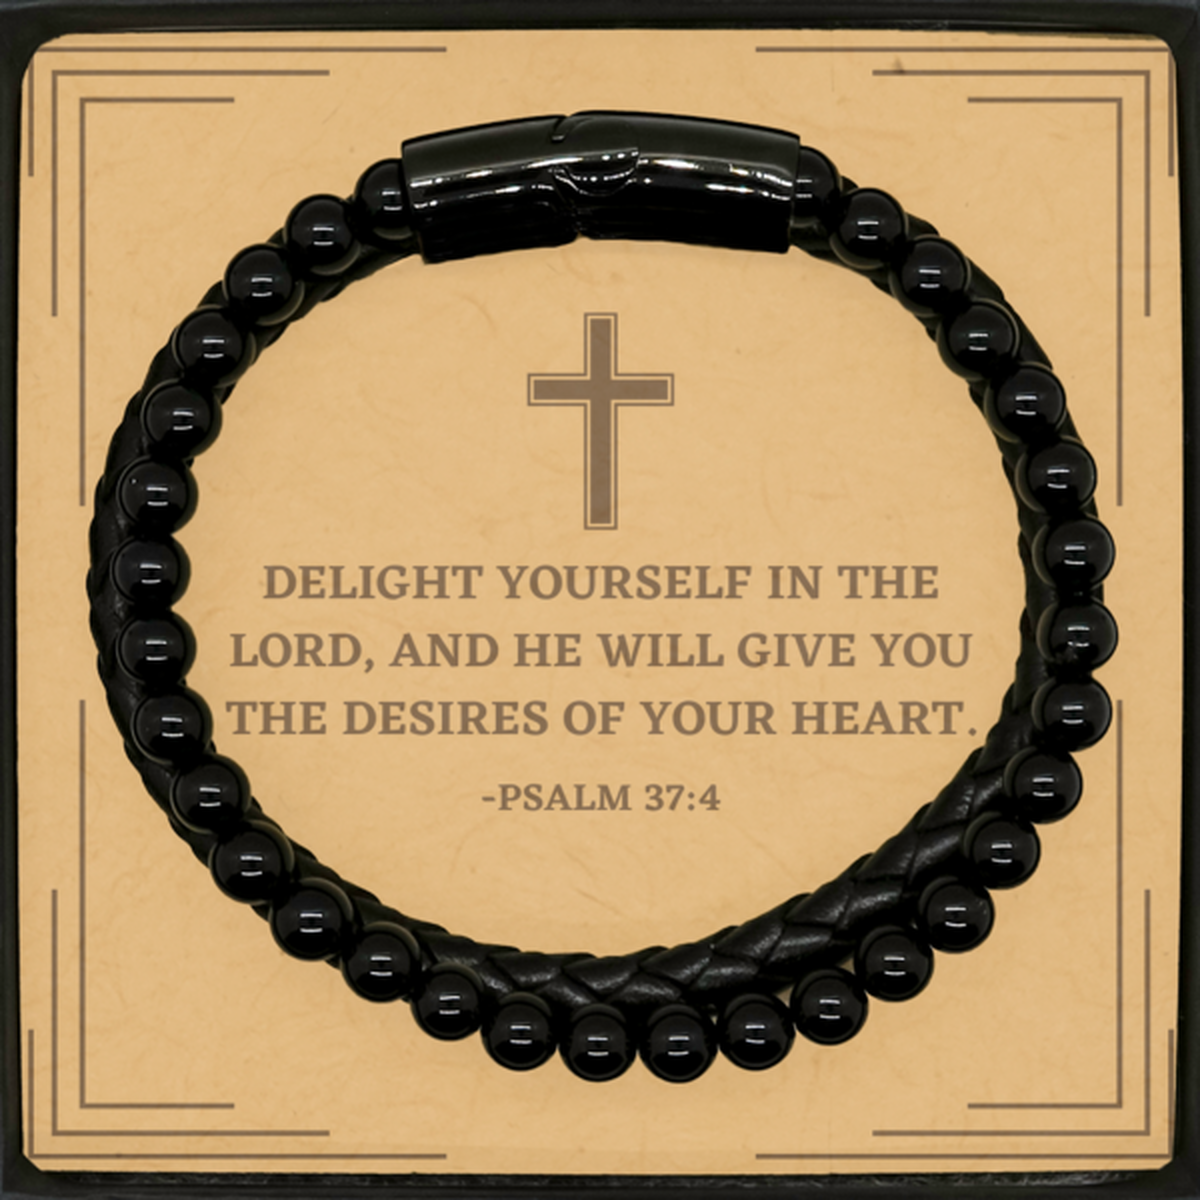 Baptism Gifts For Teenage Boys Girls, Christian Bible Verse Stone Leather Bracelet, Delight yourself in the Lord, Confirmation Gifts, Bible Verse Card for Son, Godson, Grandson